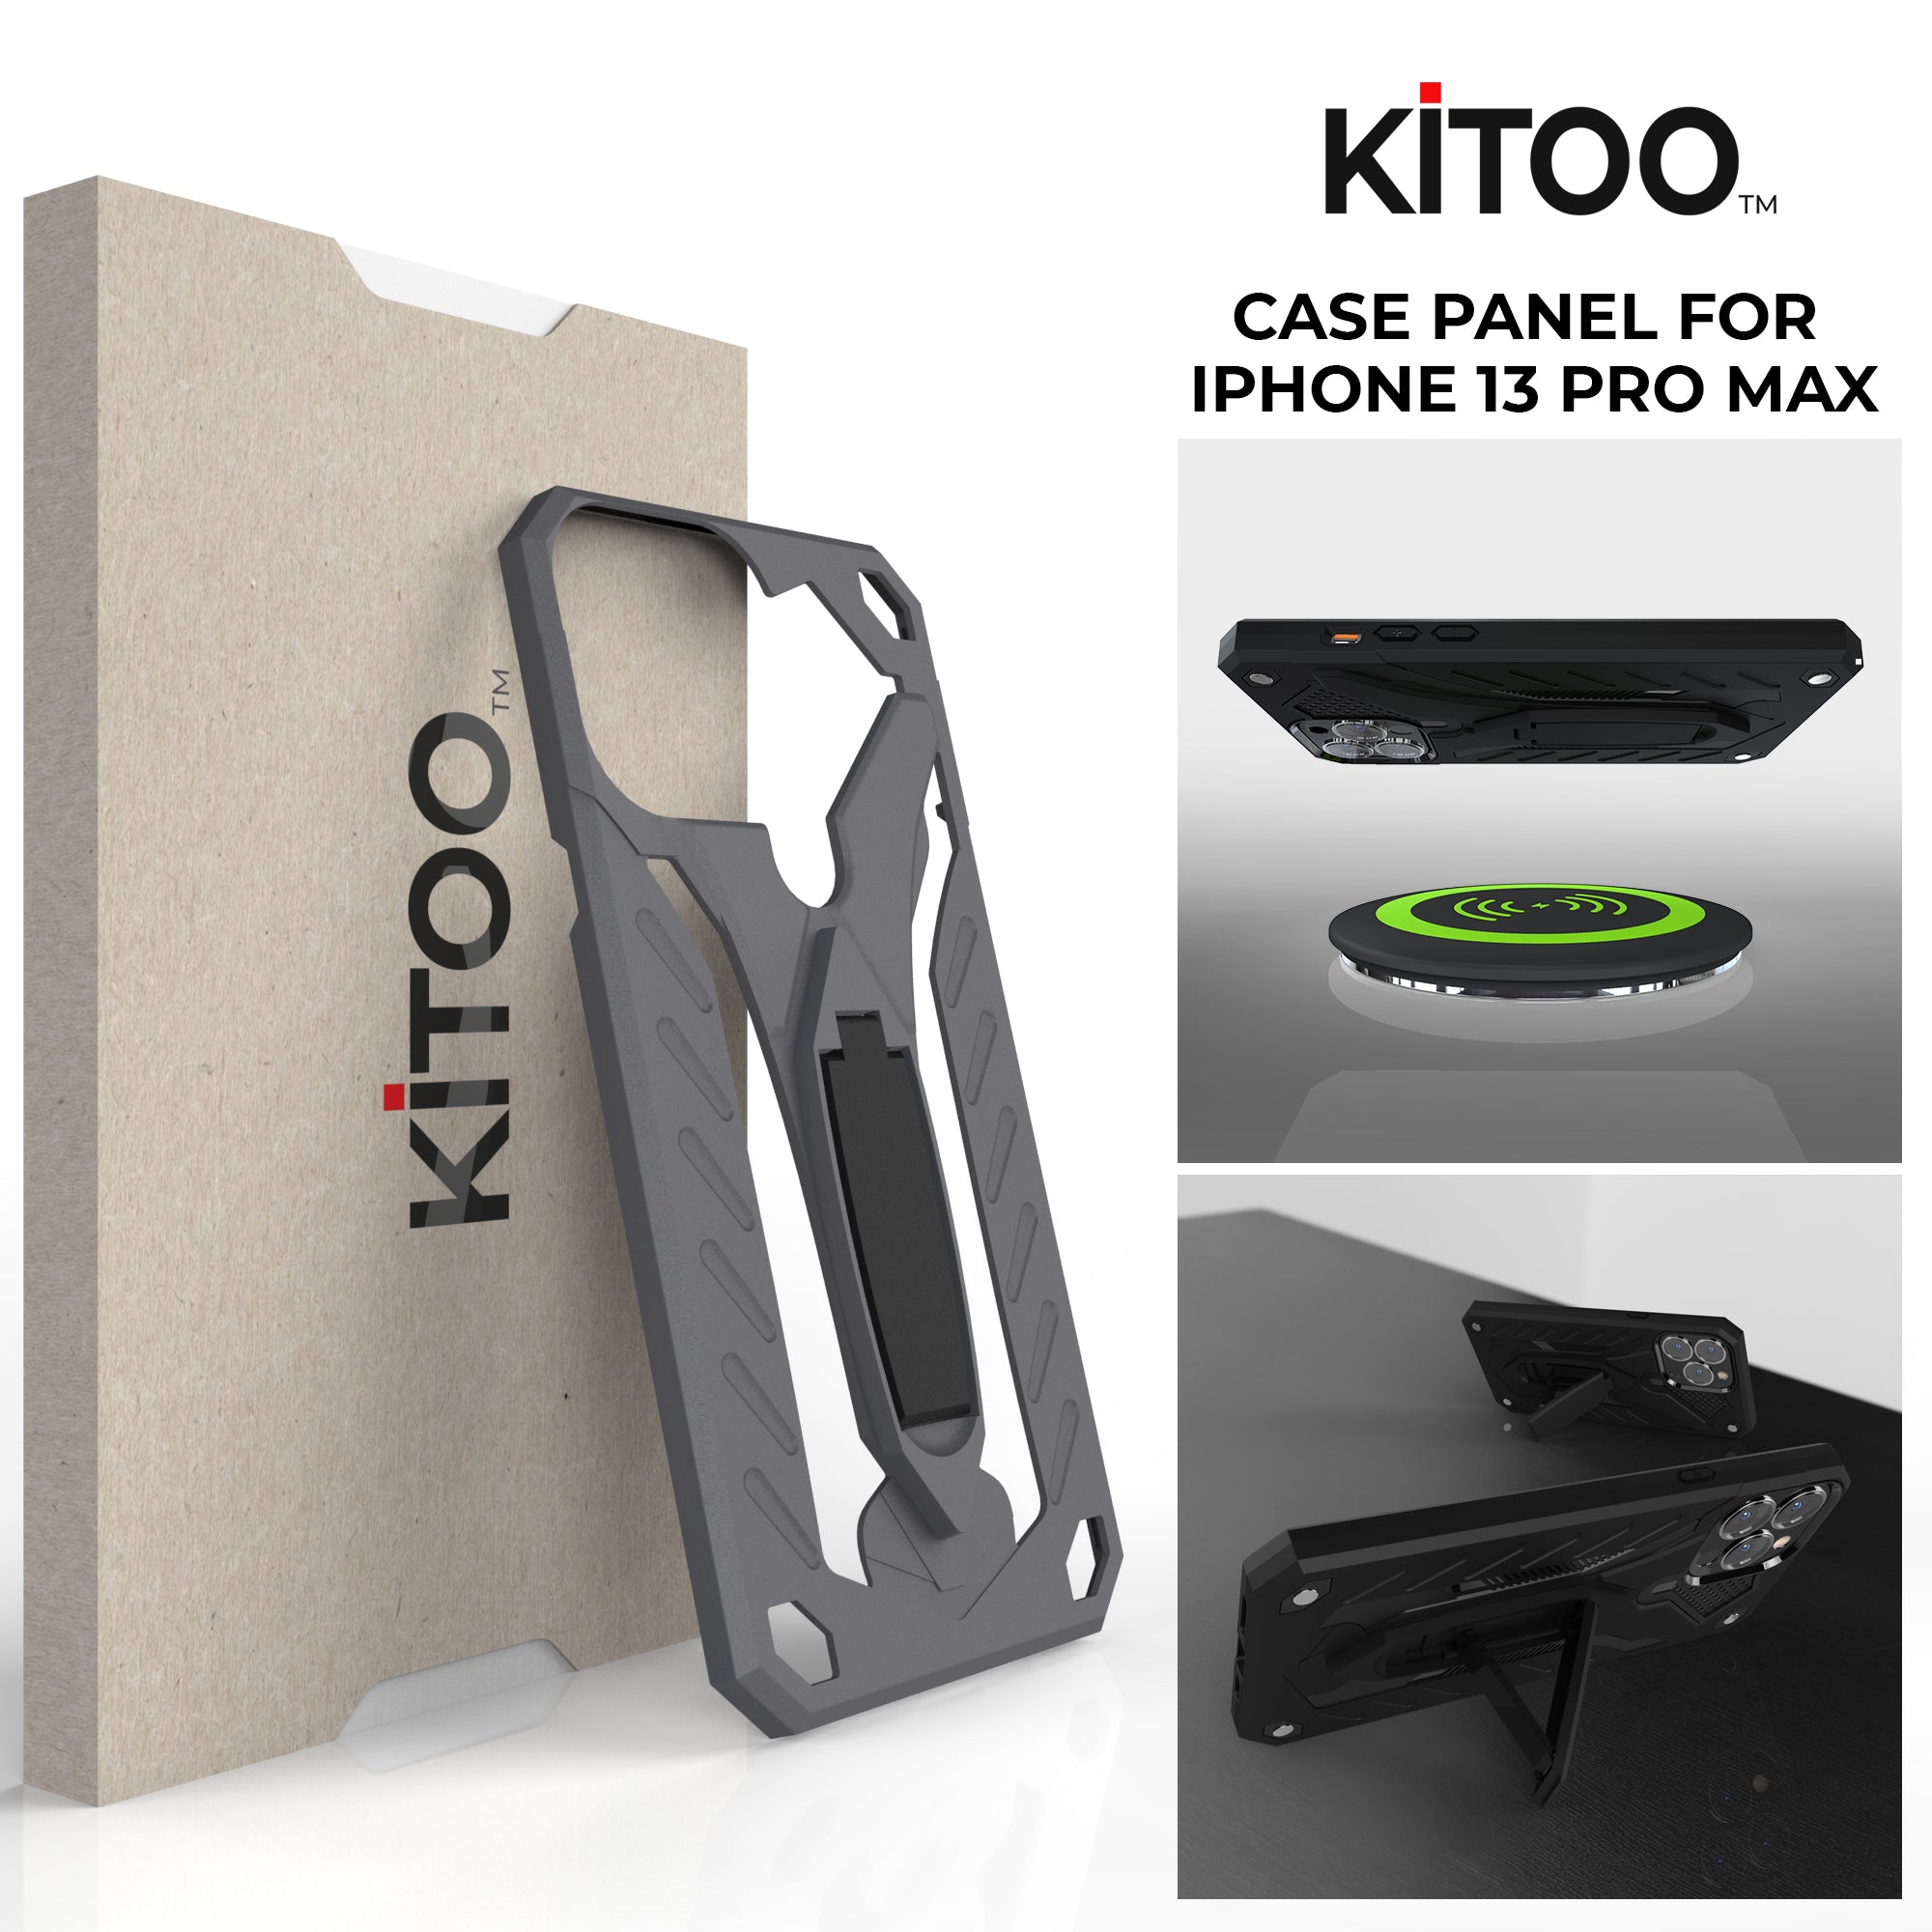 Kitoo Kickstand Panel Designed for iPhone 13 Pro Max case (Spare Part only) - Grayness